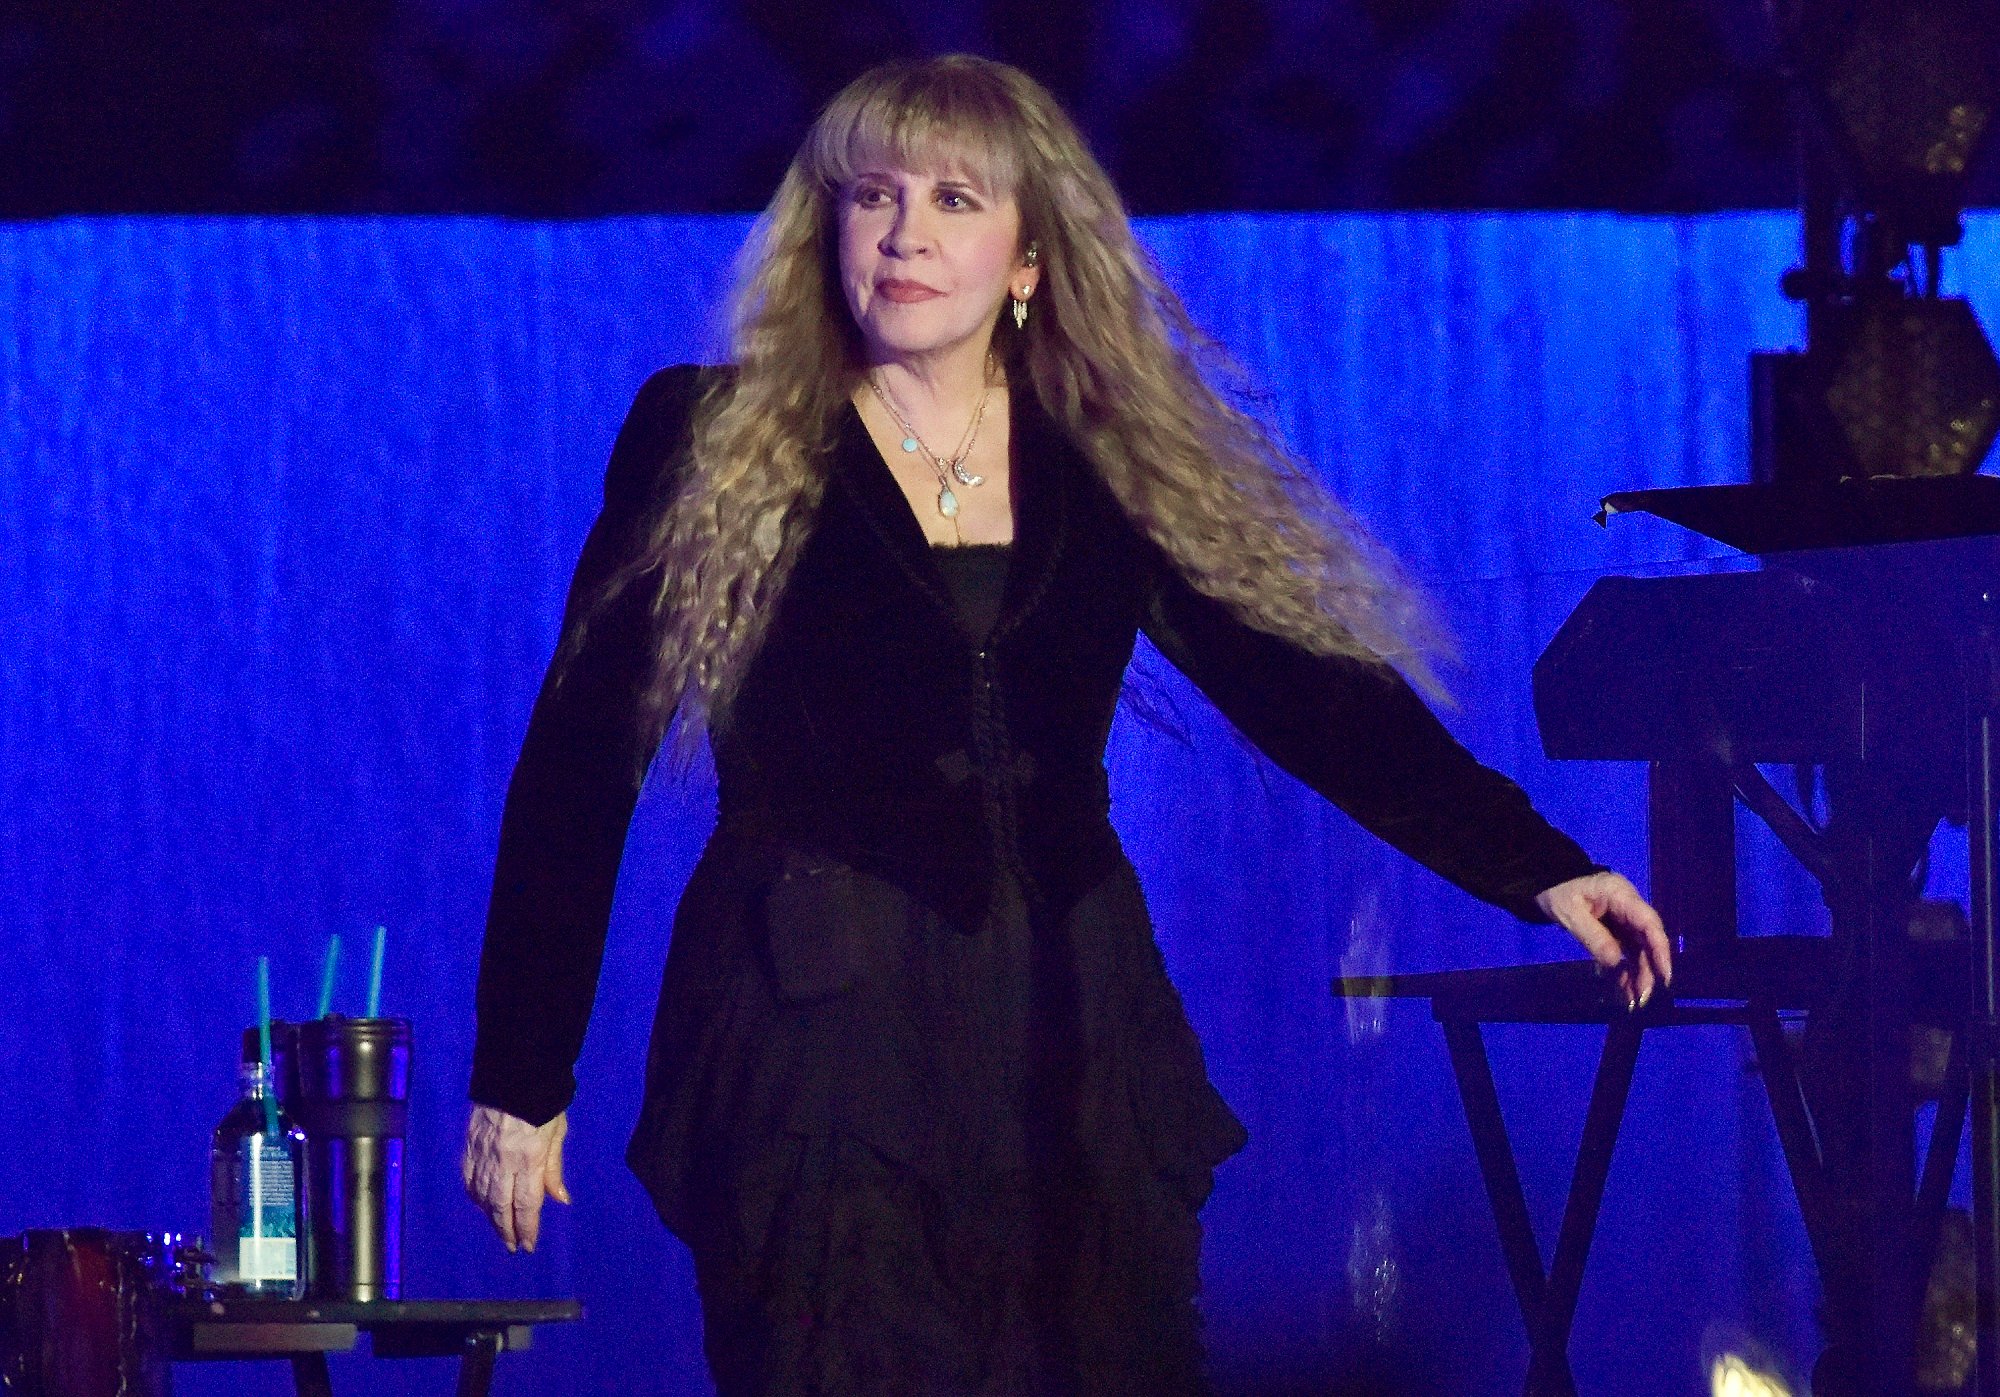 Why Stevie Nicks Wanted Bruce Hornsby to Sing ‘Two Kinds of Love’ With Her